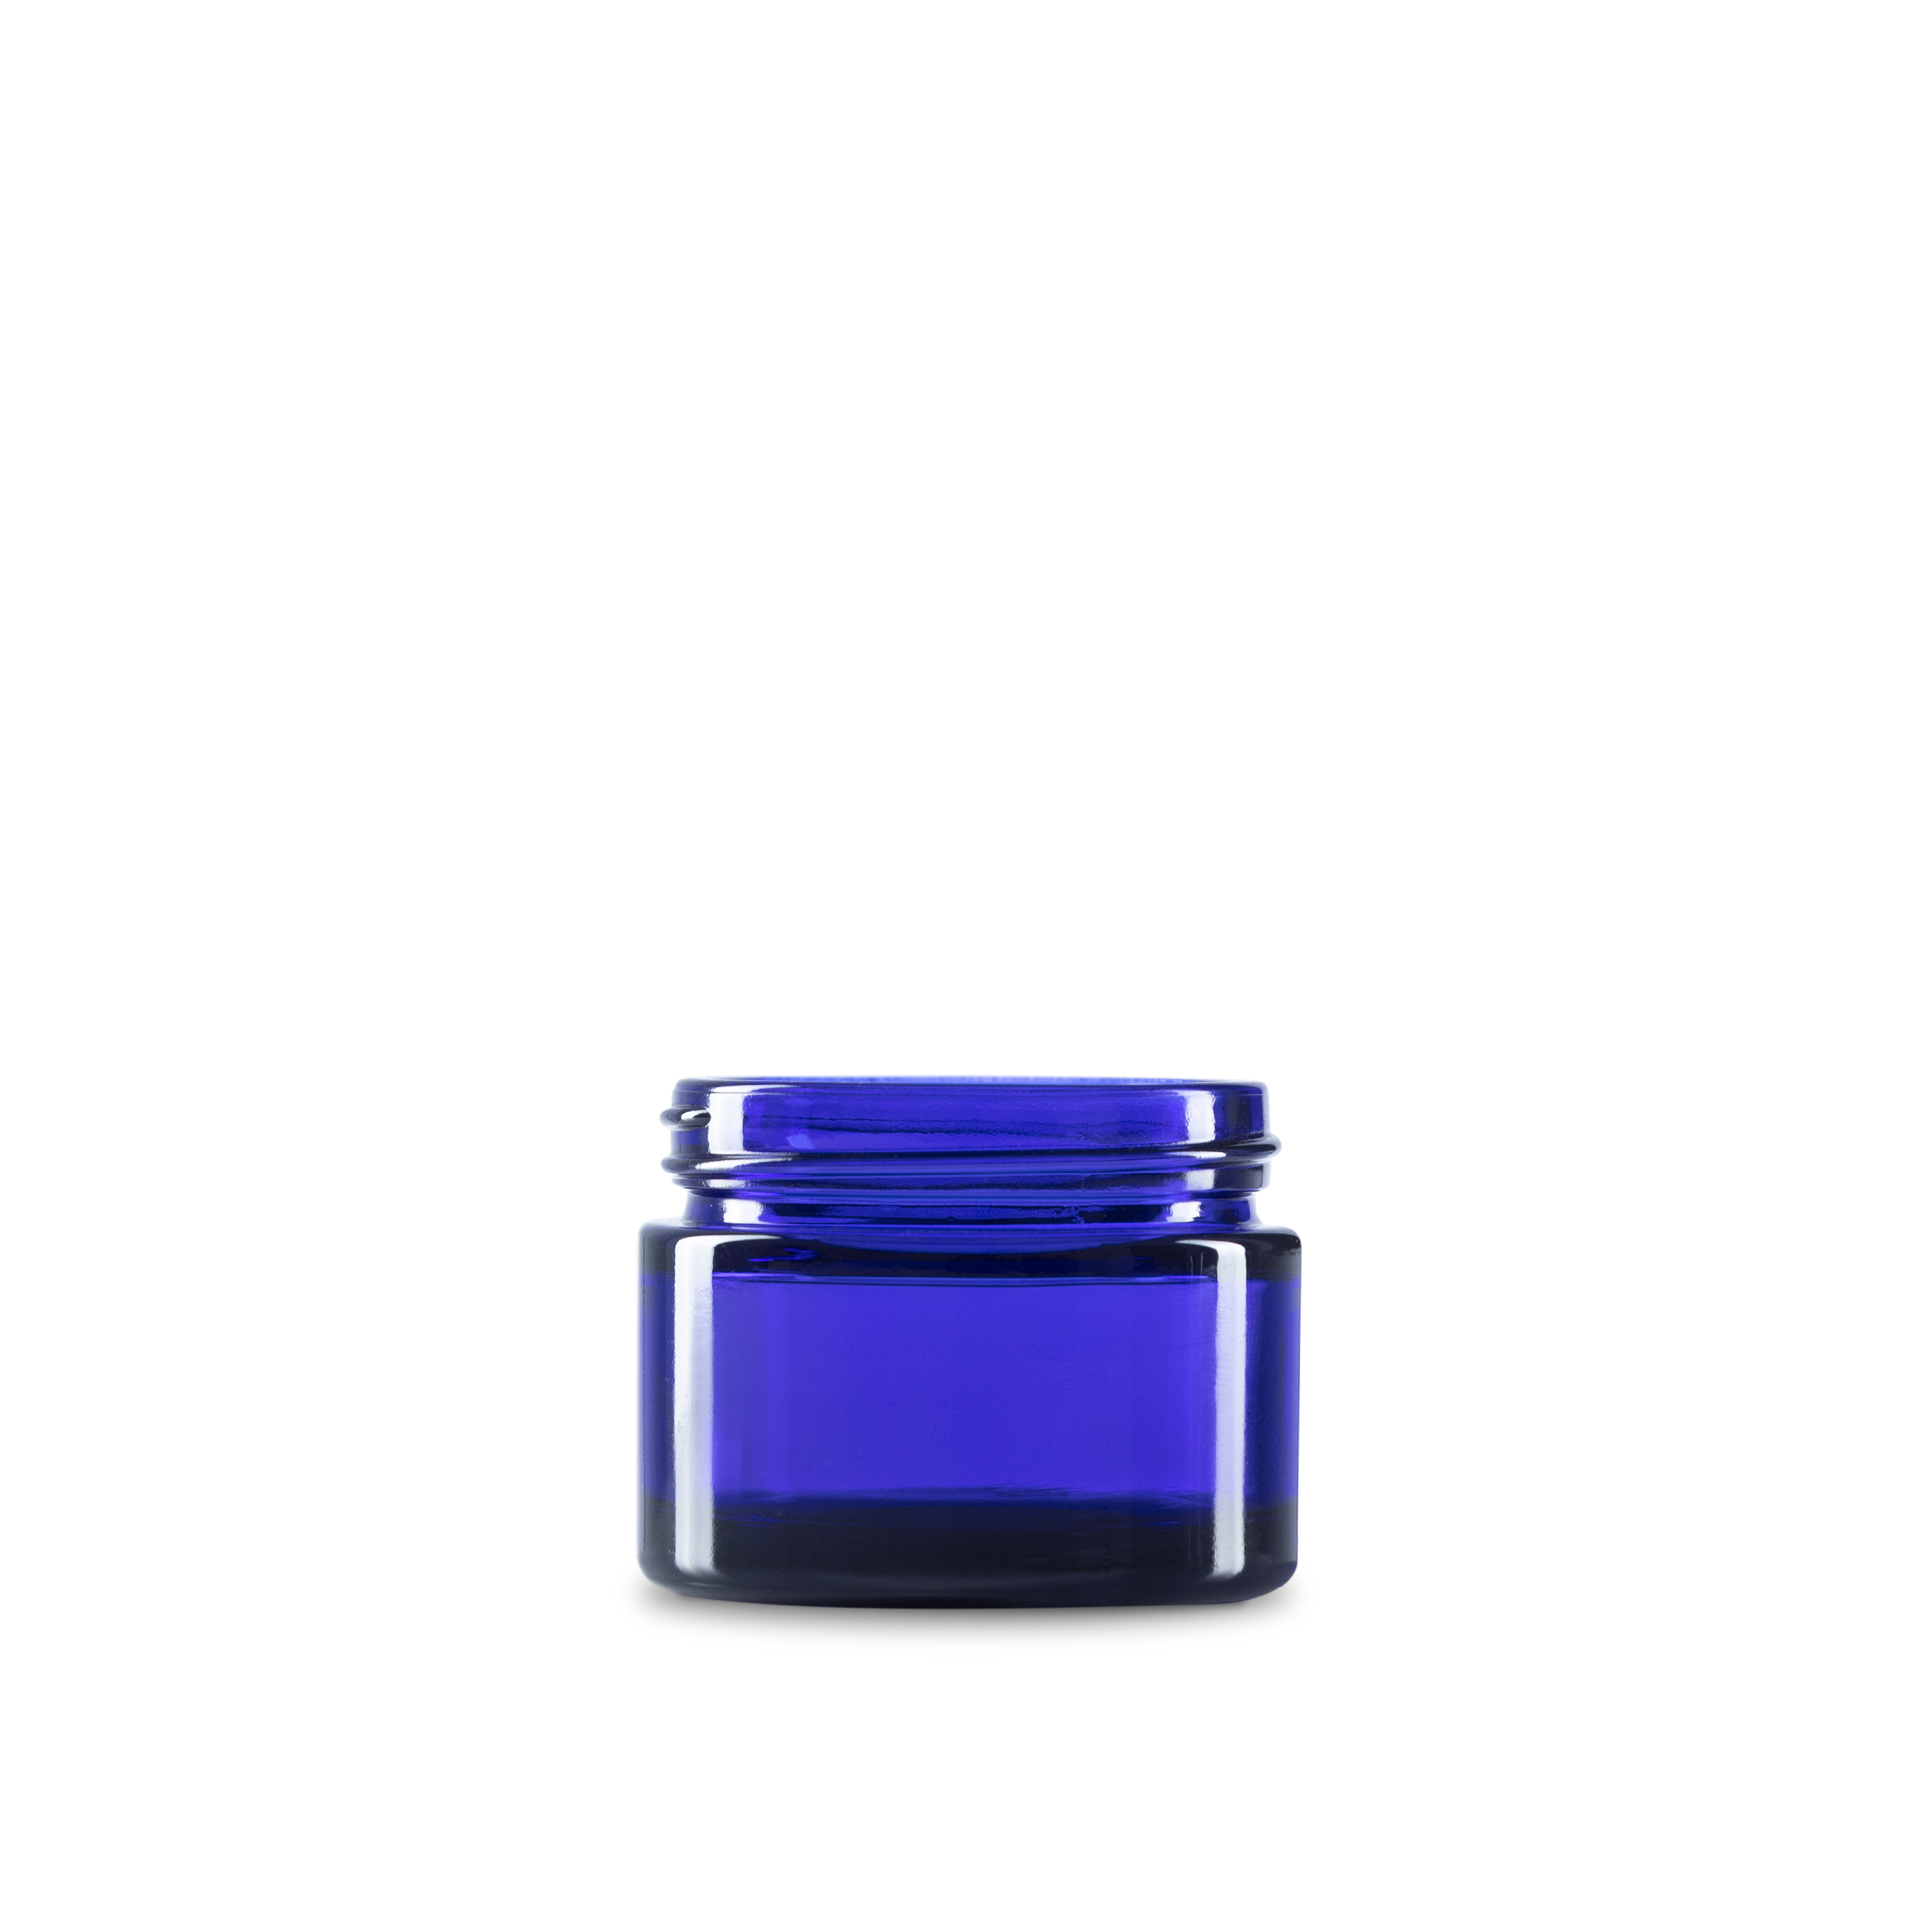 2 oz blue straight sided glass round jars are perfect for storing oils. these jars are Food Safe and bpa free. 